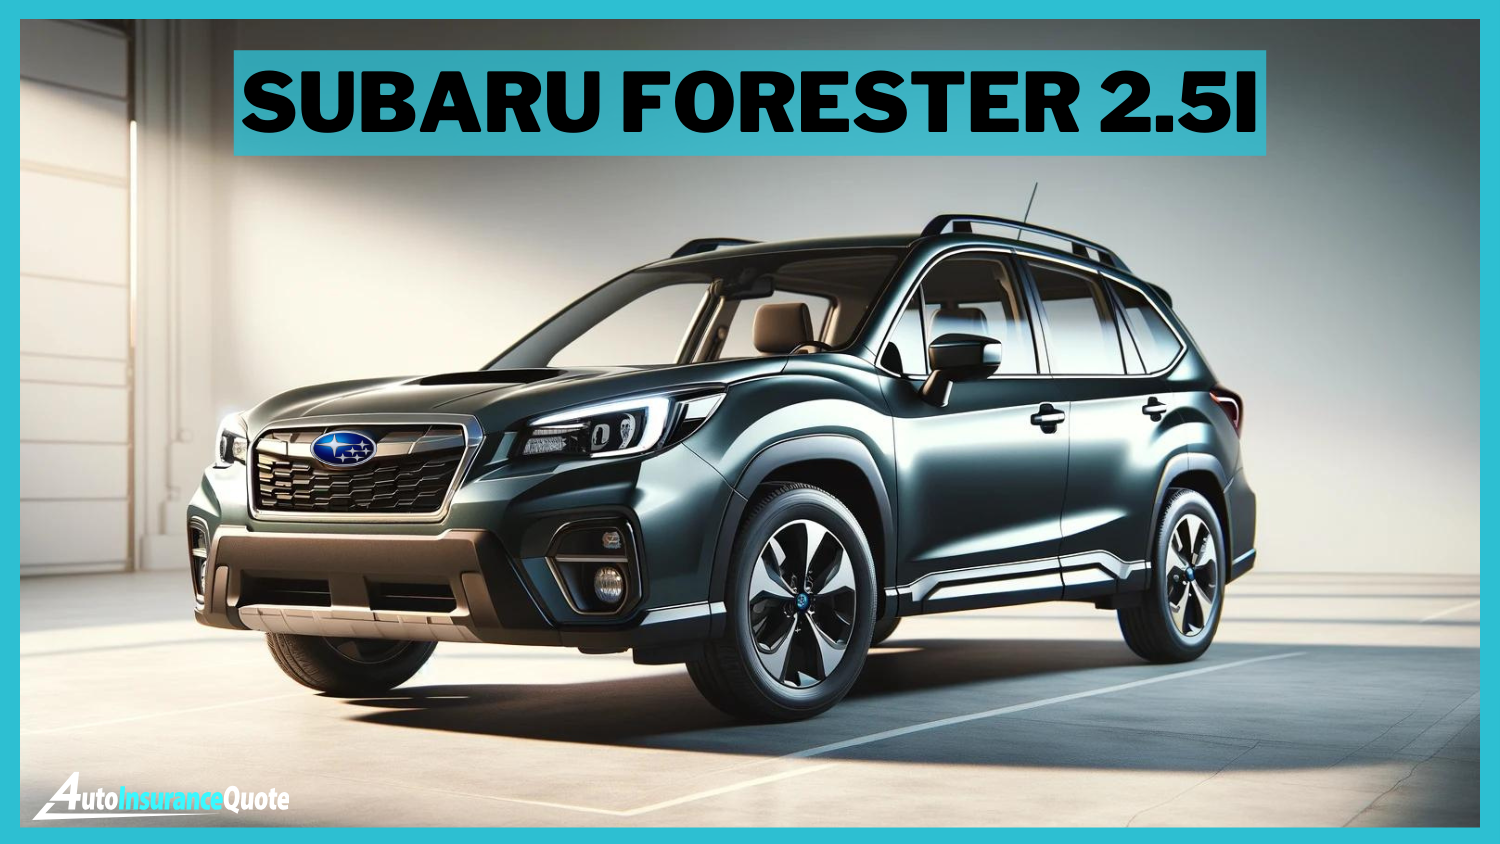 Subaru Forester 2.5I: Cheapest Cars for 17-Year-Olds to Insure